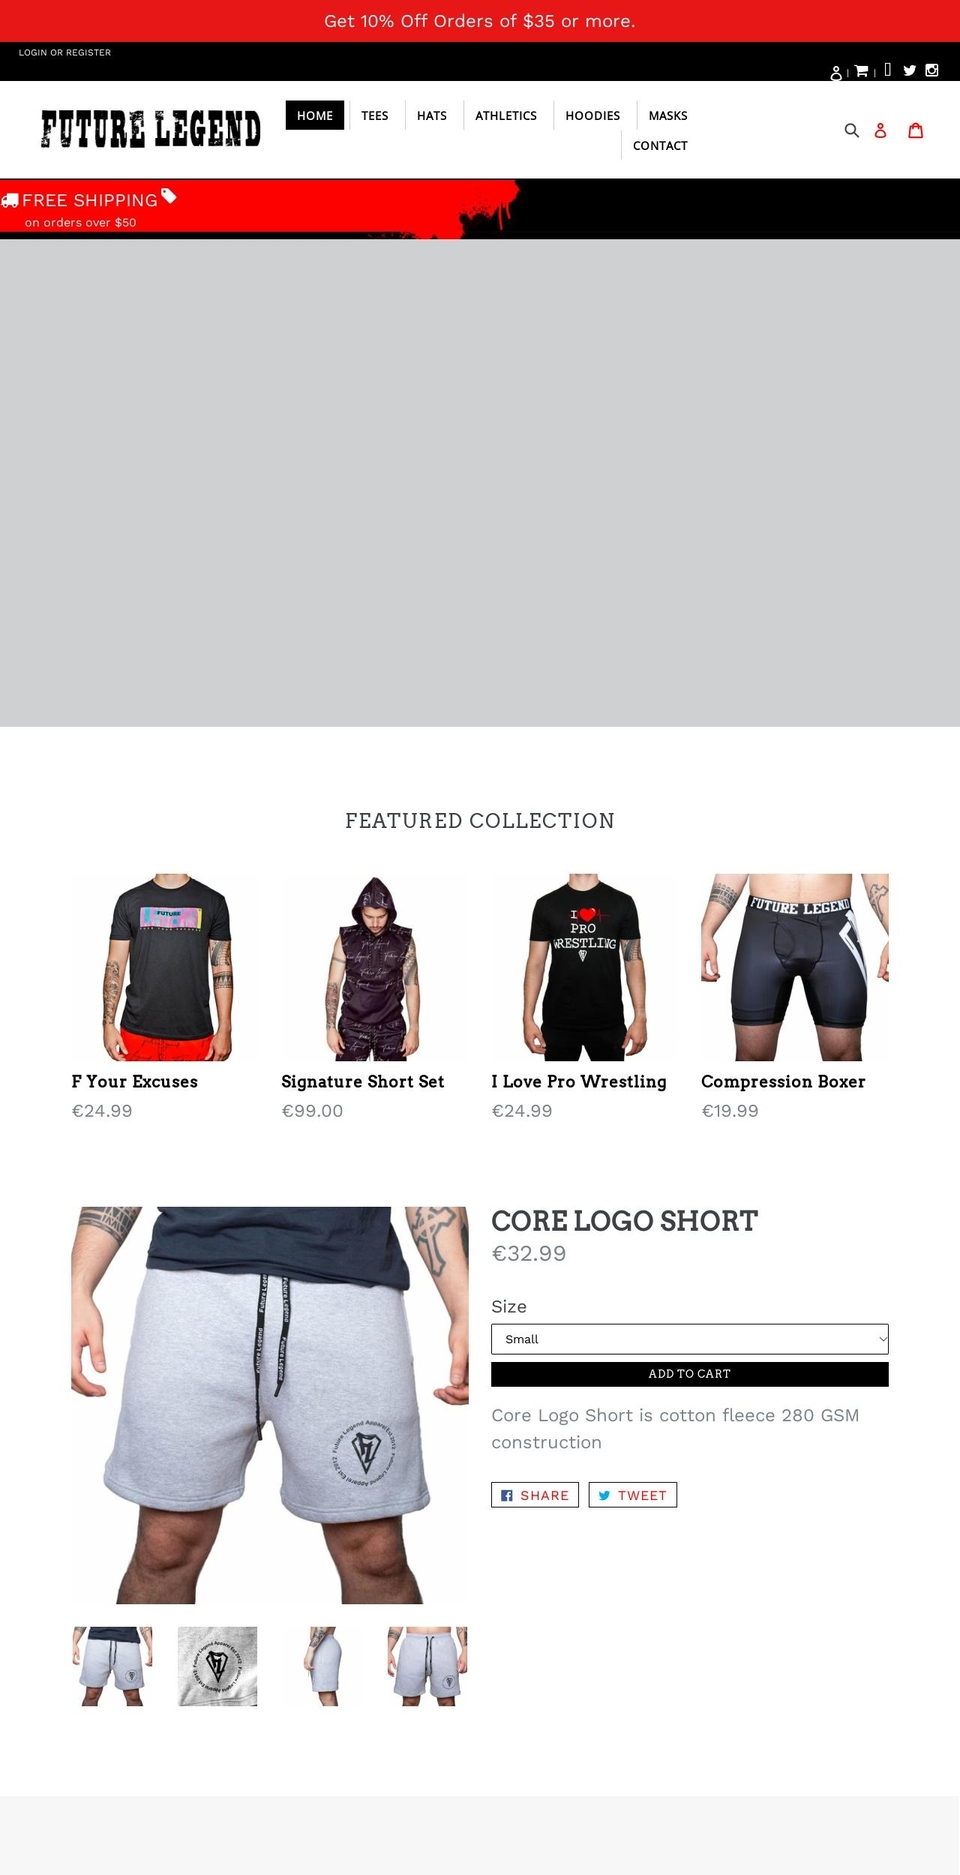 Legend Shopify theme site example flyingcans.com